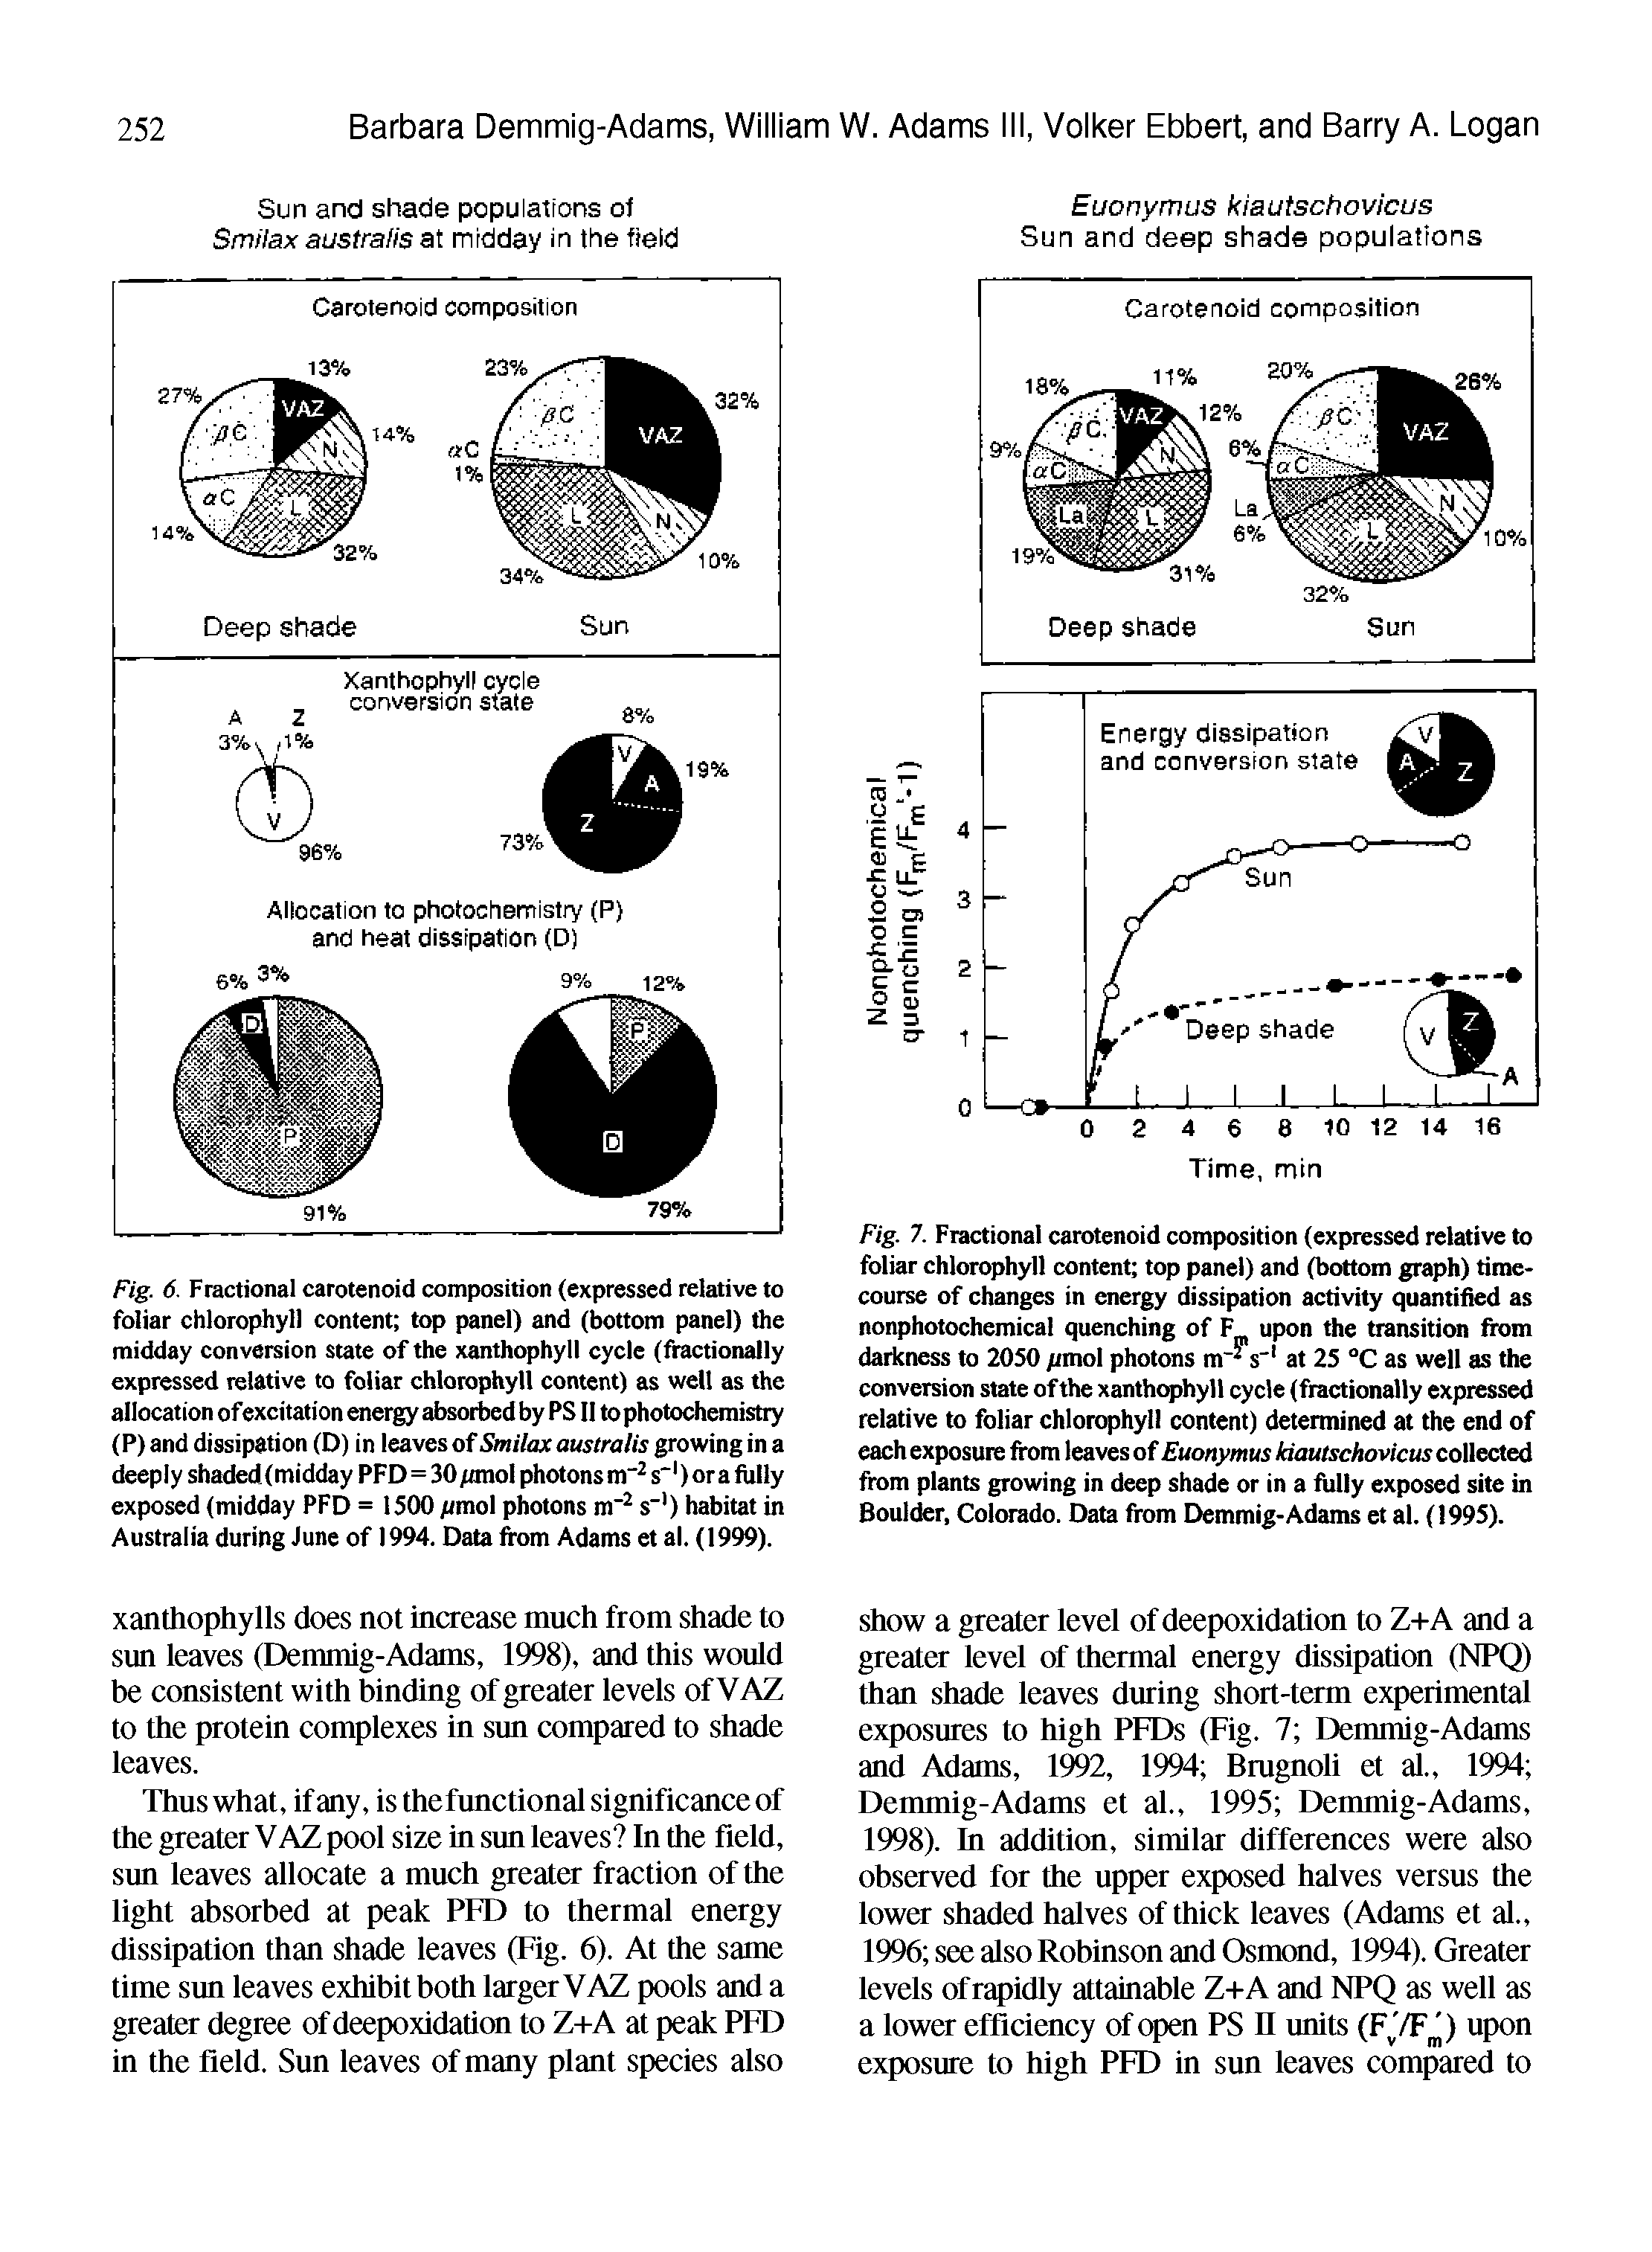 Fig. 7. Fractional carotenoid composition (expressed relative to foliar chlorophyll content top panel) and (bottom graph) time-course of changes in energy dissipation activity quantified as nonphotochemical quenching of F upon the transition from darkness to 2050 /imol photons m s" at 25 C as well as the conversion state of the xanthophyll cycle (fractionally expressed relative to foliar chlorophyll content) determined at the end of each exposure from leaves of Euonymus kiautschovicus collected from plants growing in deep shade or in a fully exposed site in Boulder, Colorado. Data from Demmig-Adams et al. (1995).